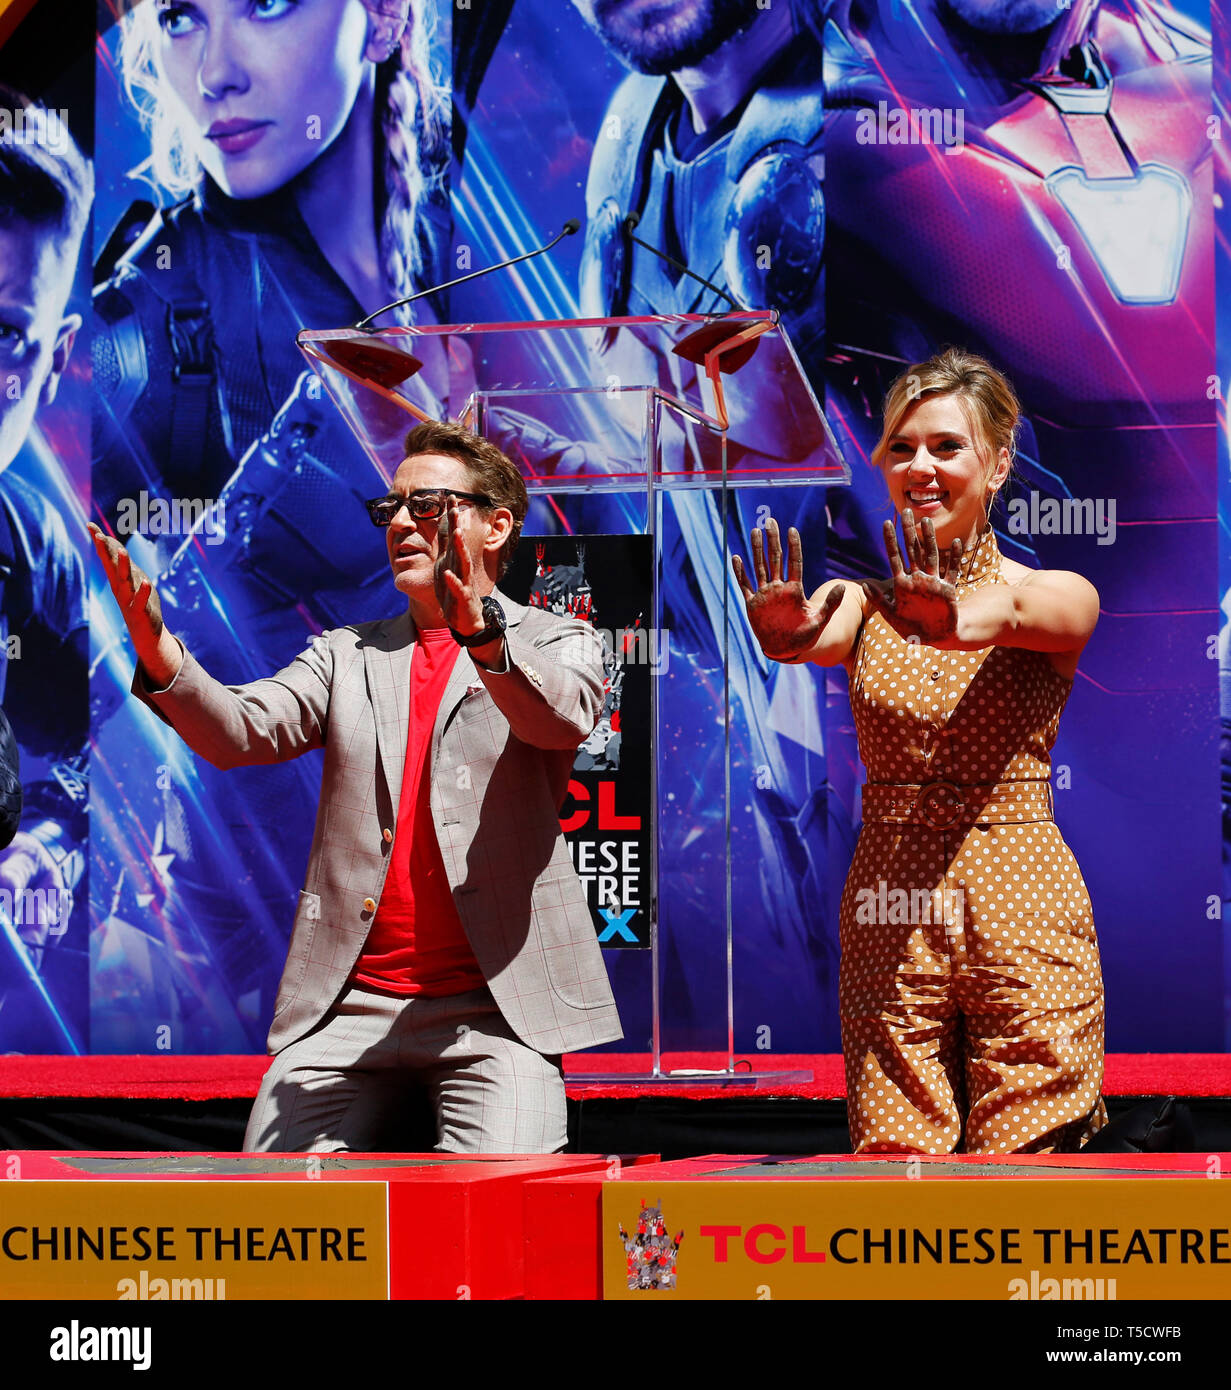 (190424) -- LOS ANGELES, April 24, 2019 (Xinhua) -- Actor Robert Downey Jr. (L) and actress Scarlett Johansson show their hands after putting their handprints in cement during print ceremony in the forecourt of the TCL Chinese Theater in Los Angeles, the United States, April 23, 2019. The cast of Marvel Studios 'Avengers: Endgame' including Robert Downey Jr., Chris Evans, Mark Ruffalo, Chris Hemsworth, Scarlett Johansson, and Jeremy Renner, along with Marvel Studios President Kevin Feige, received one of Hollywood's oldest accolades this Tuesday, to sign their names and put their handprints in Stock Photo